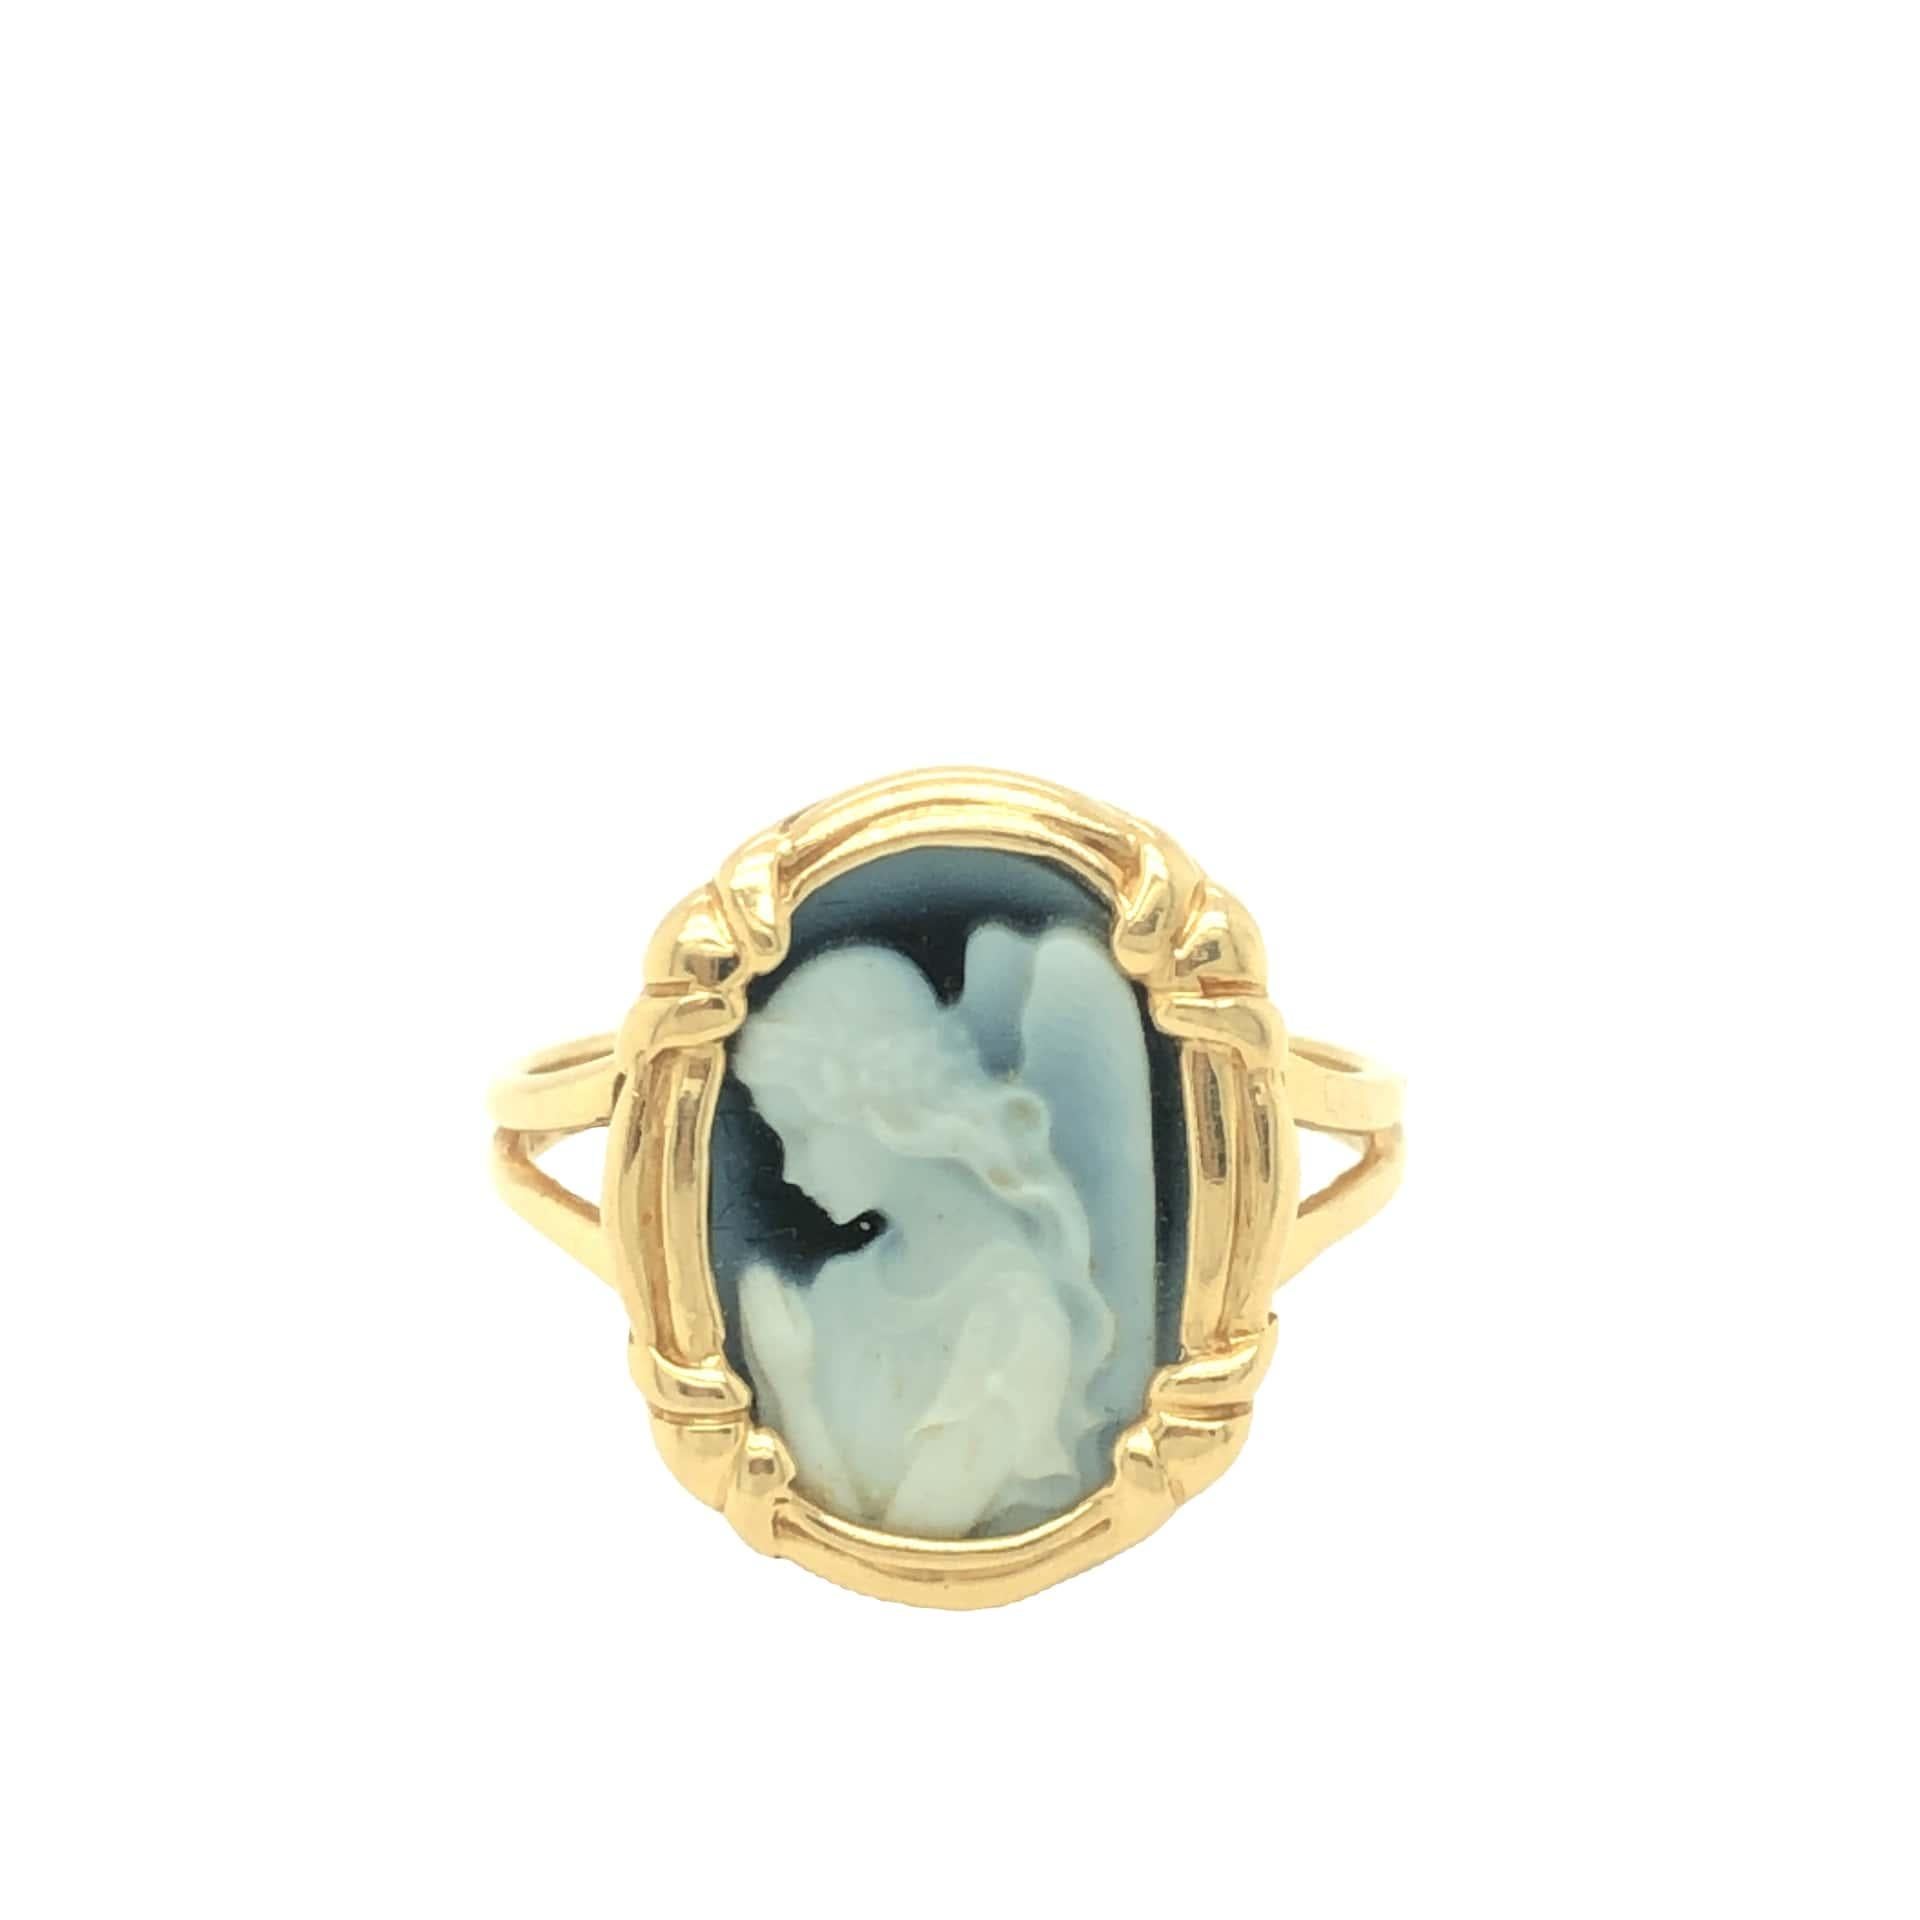 This sweet praying angel is beautifully carved on blue agate and adorned in ribbon motif 14K yellow gold frame. The ring is in pristine condition and stamped OTC 14K.

Gross weight 2.9 grams. Size 7 (resizable)